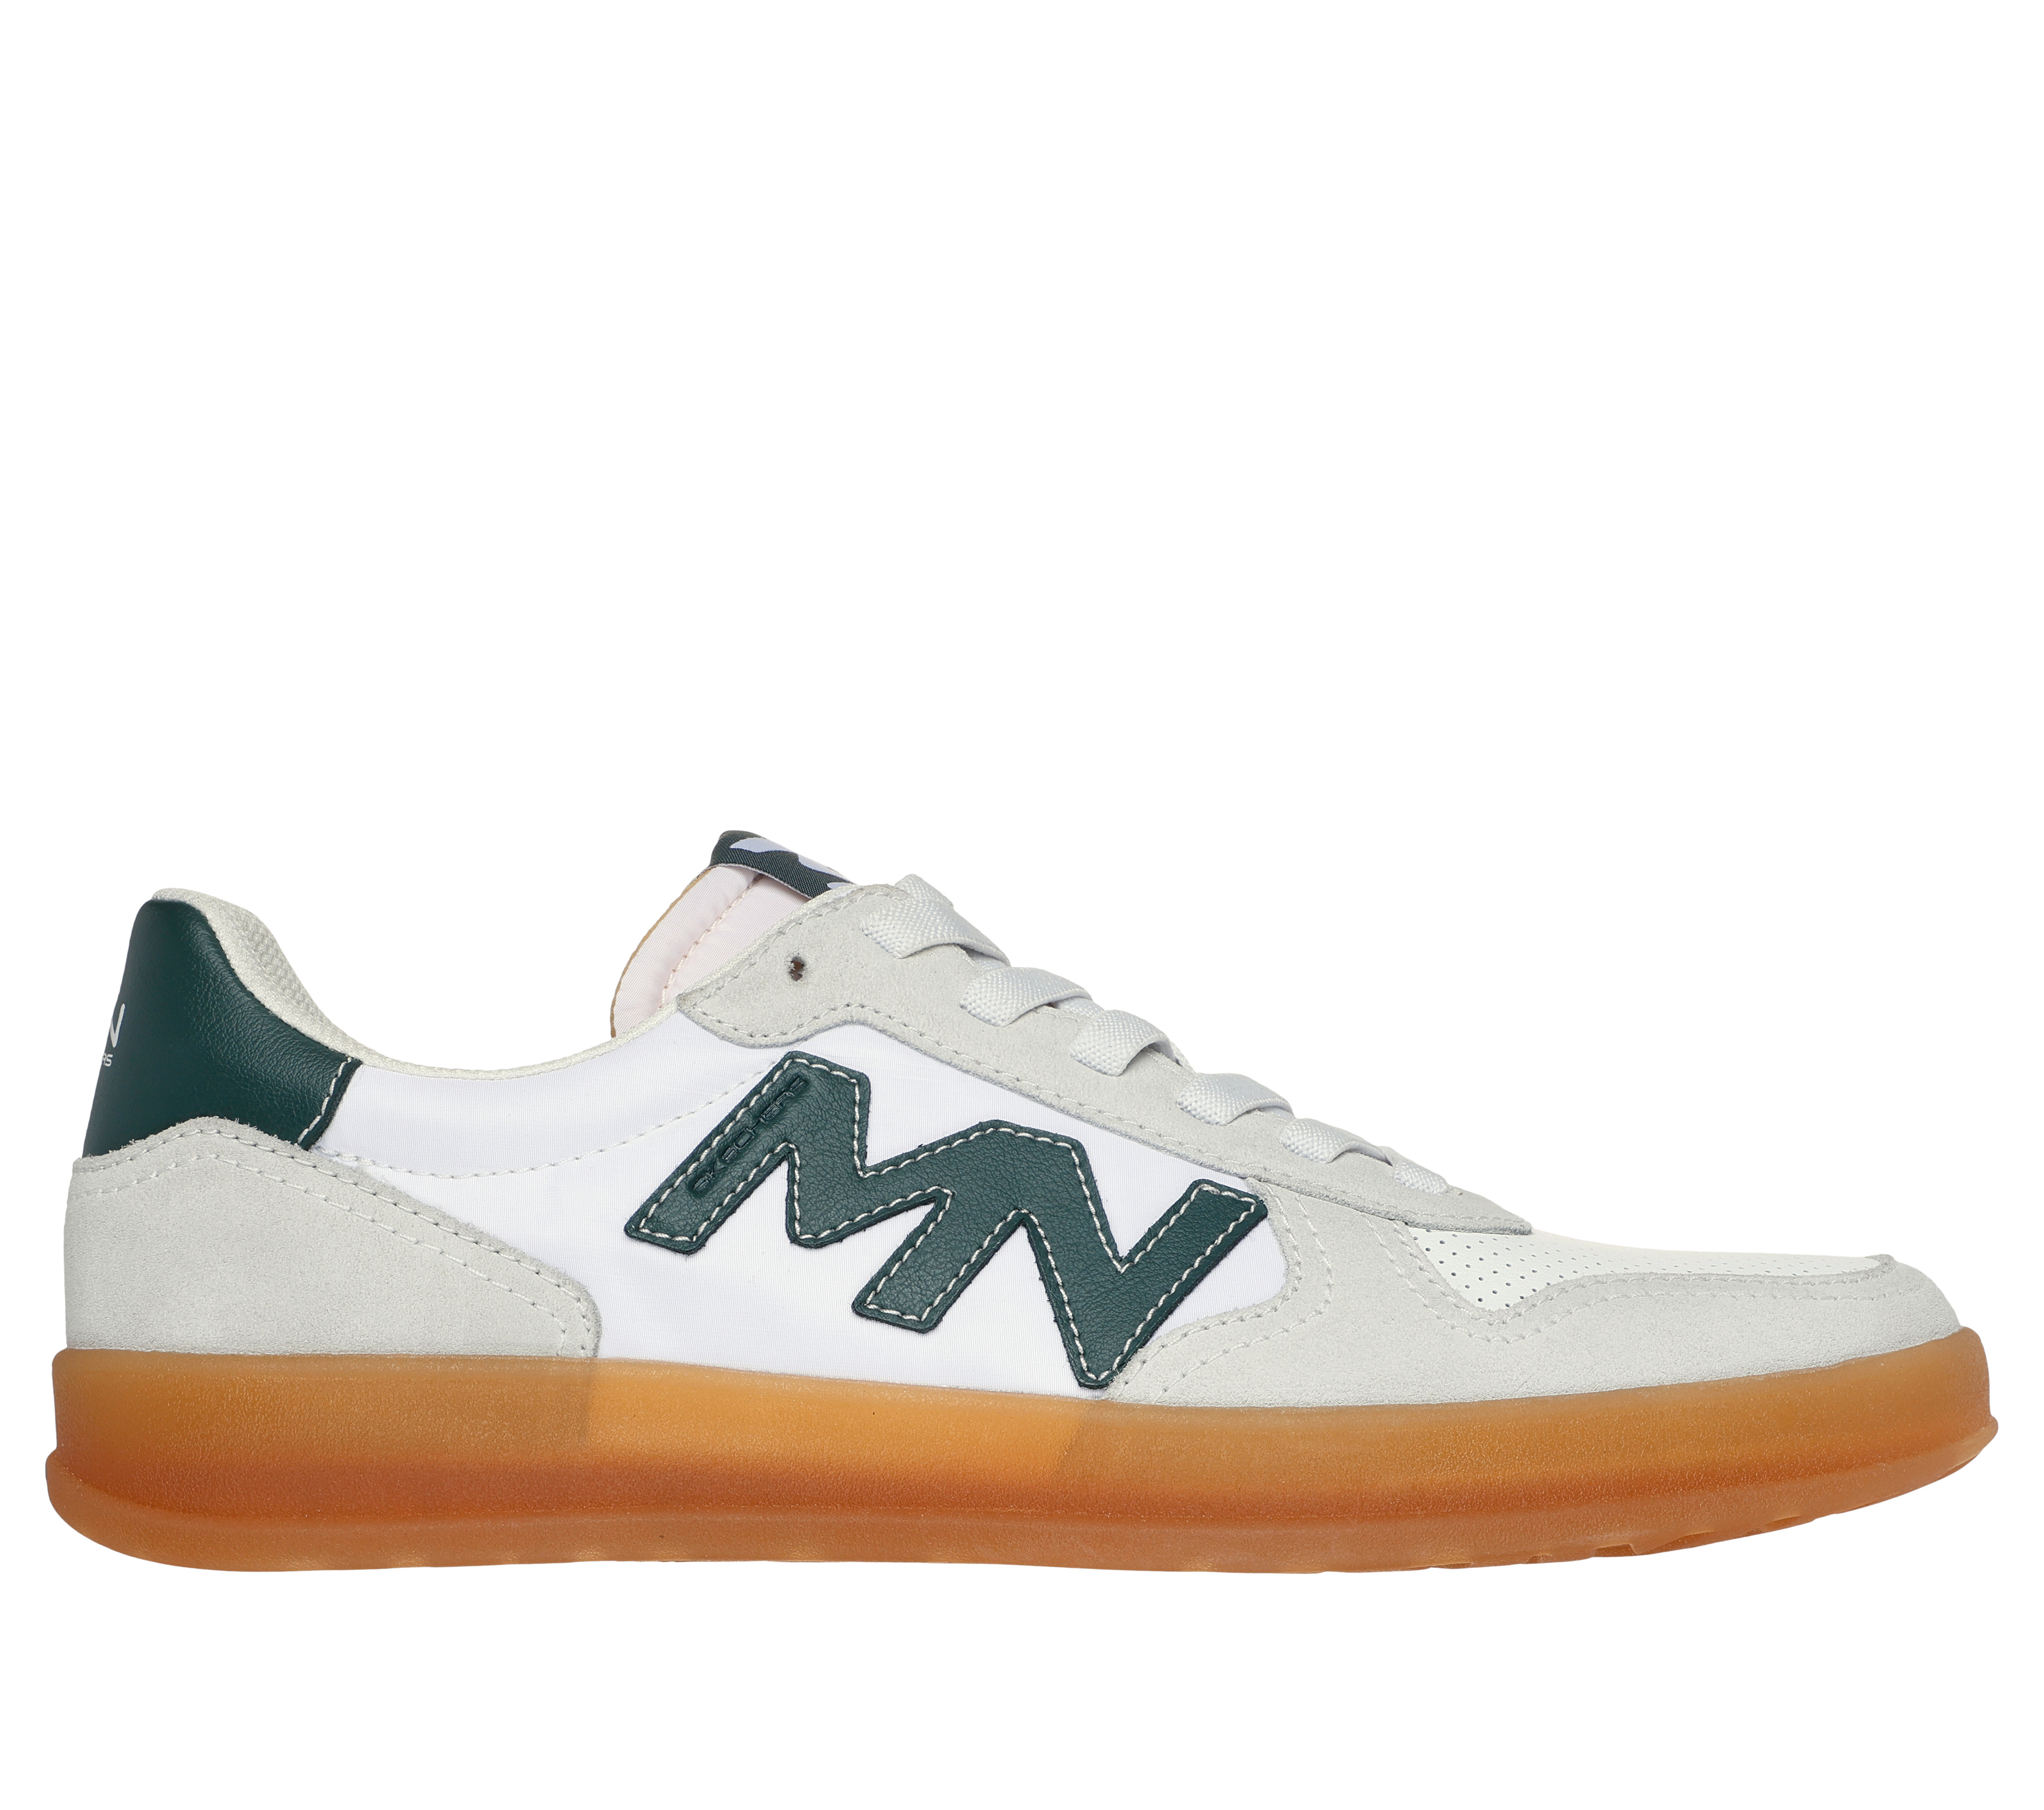 Mark Nason: New Wave Cup - The Racket | SKECHERS